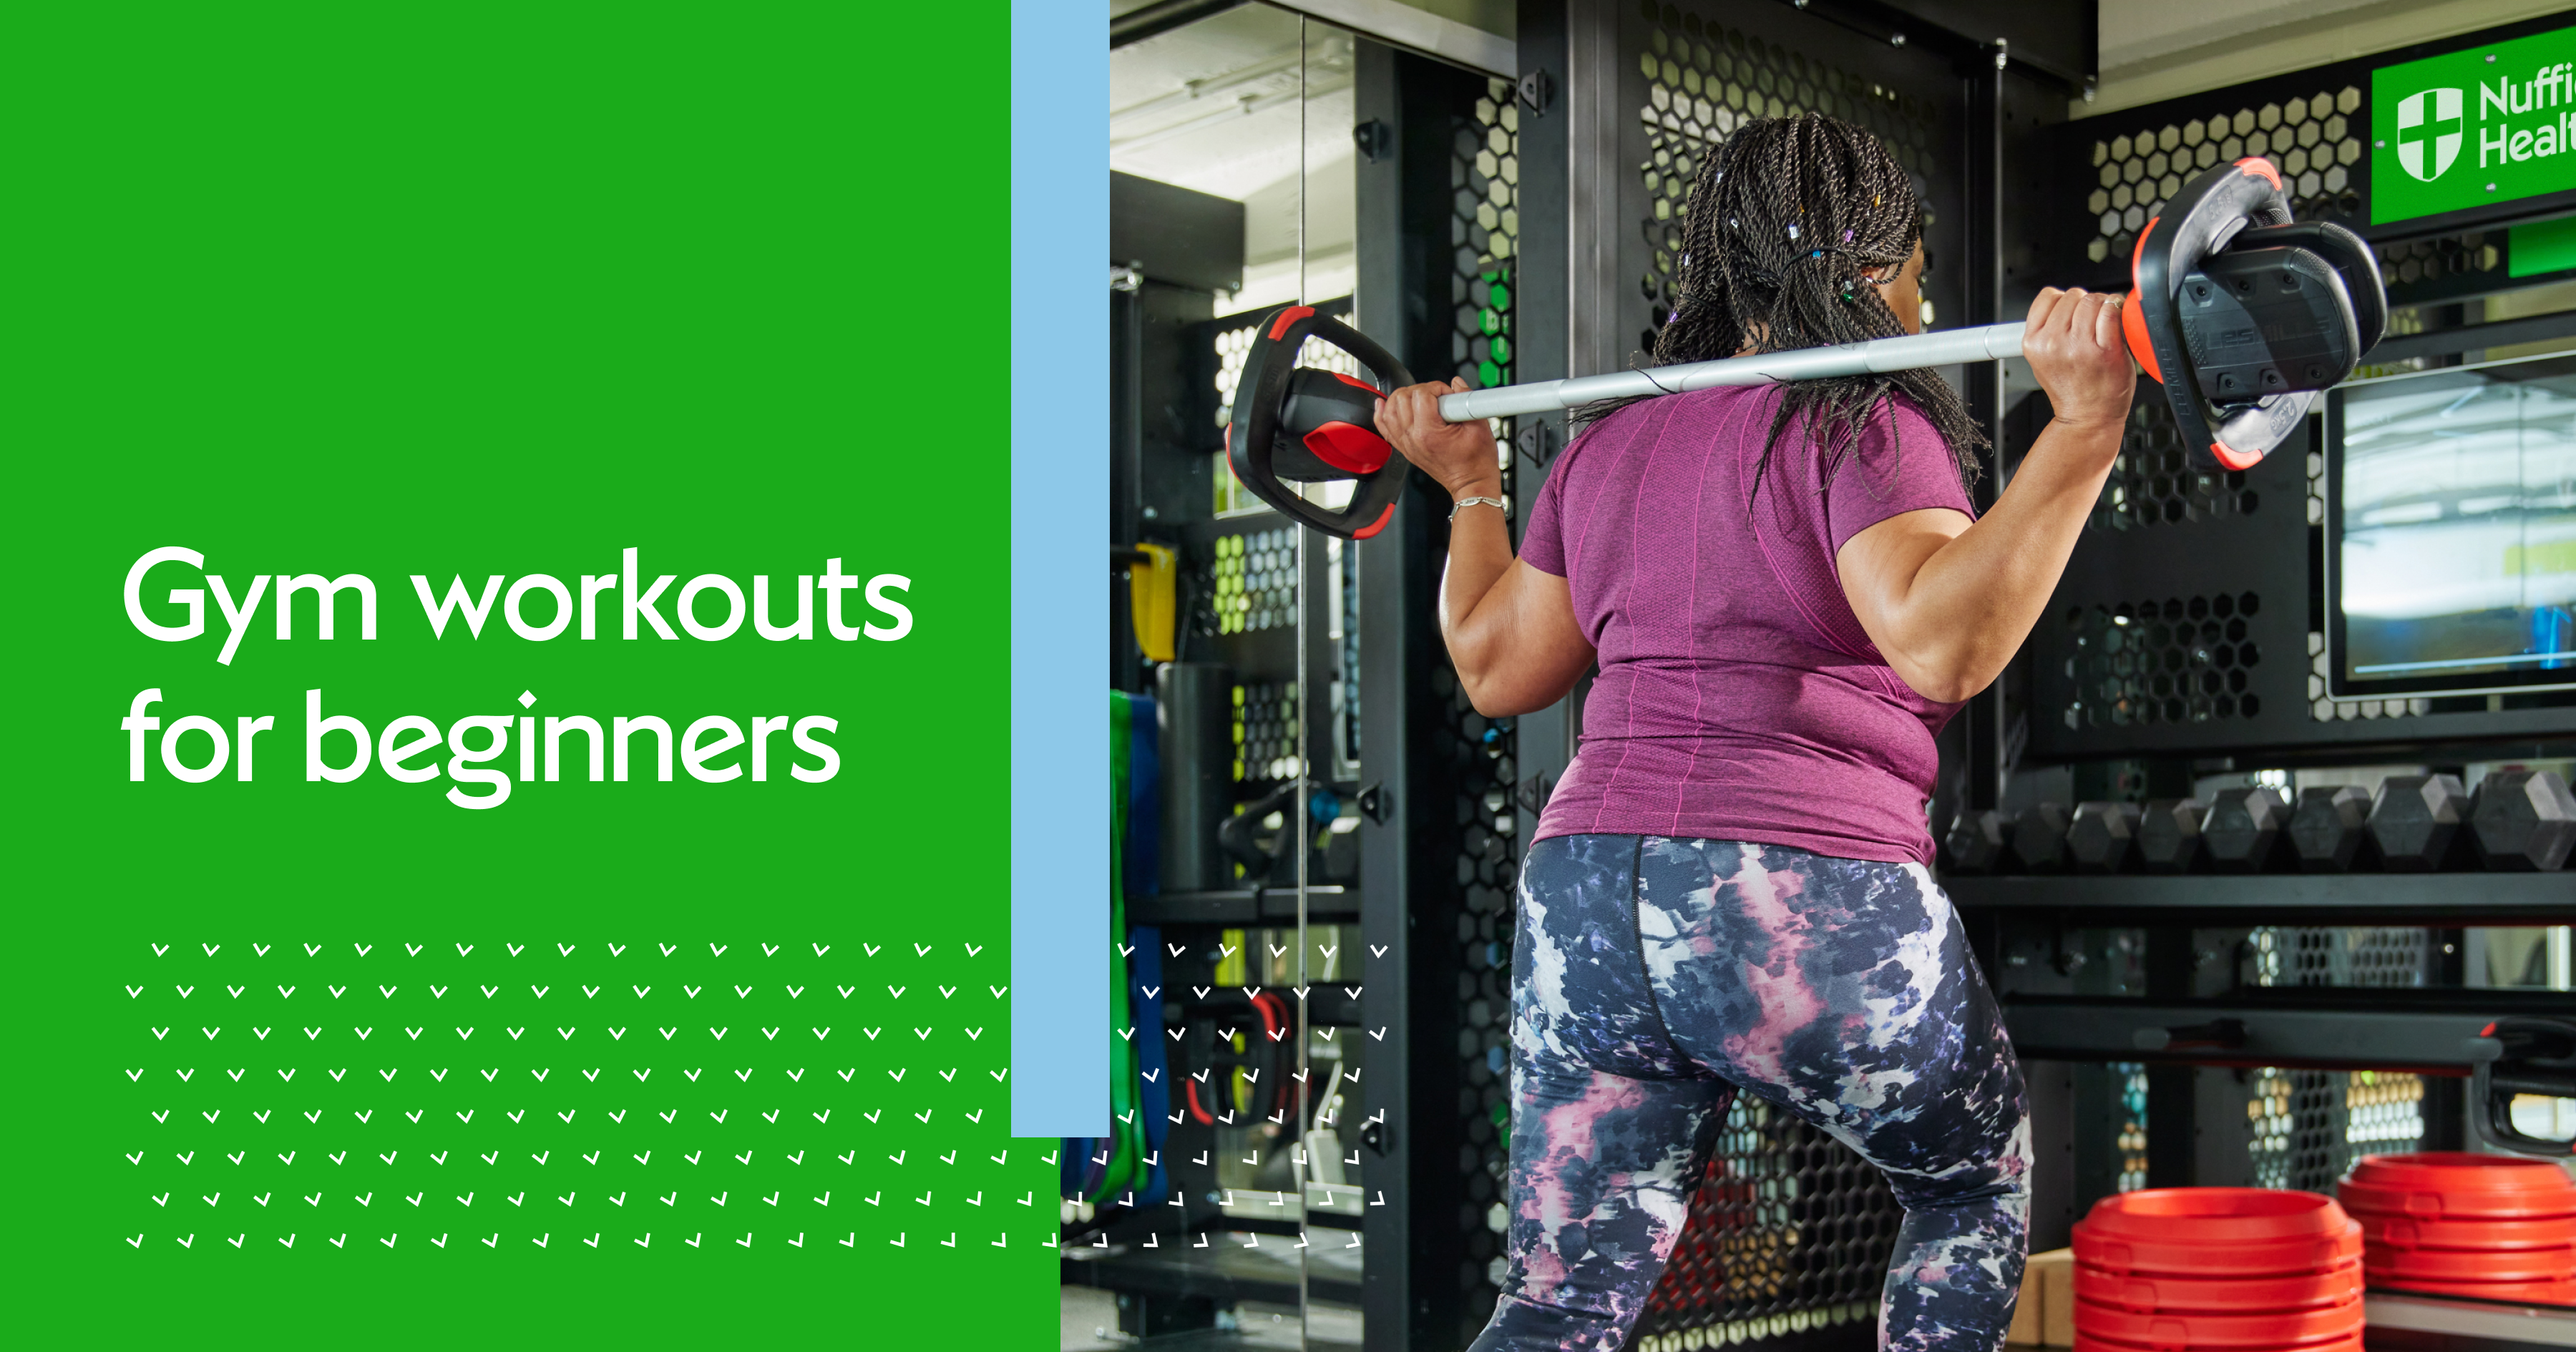 Gym workouts for beginners Nuffield Health